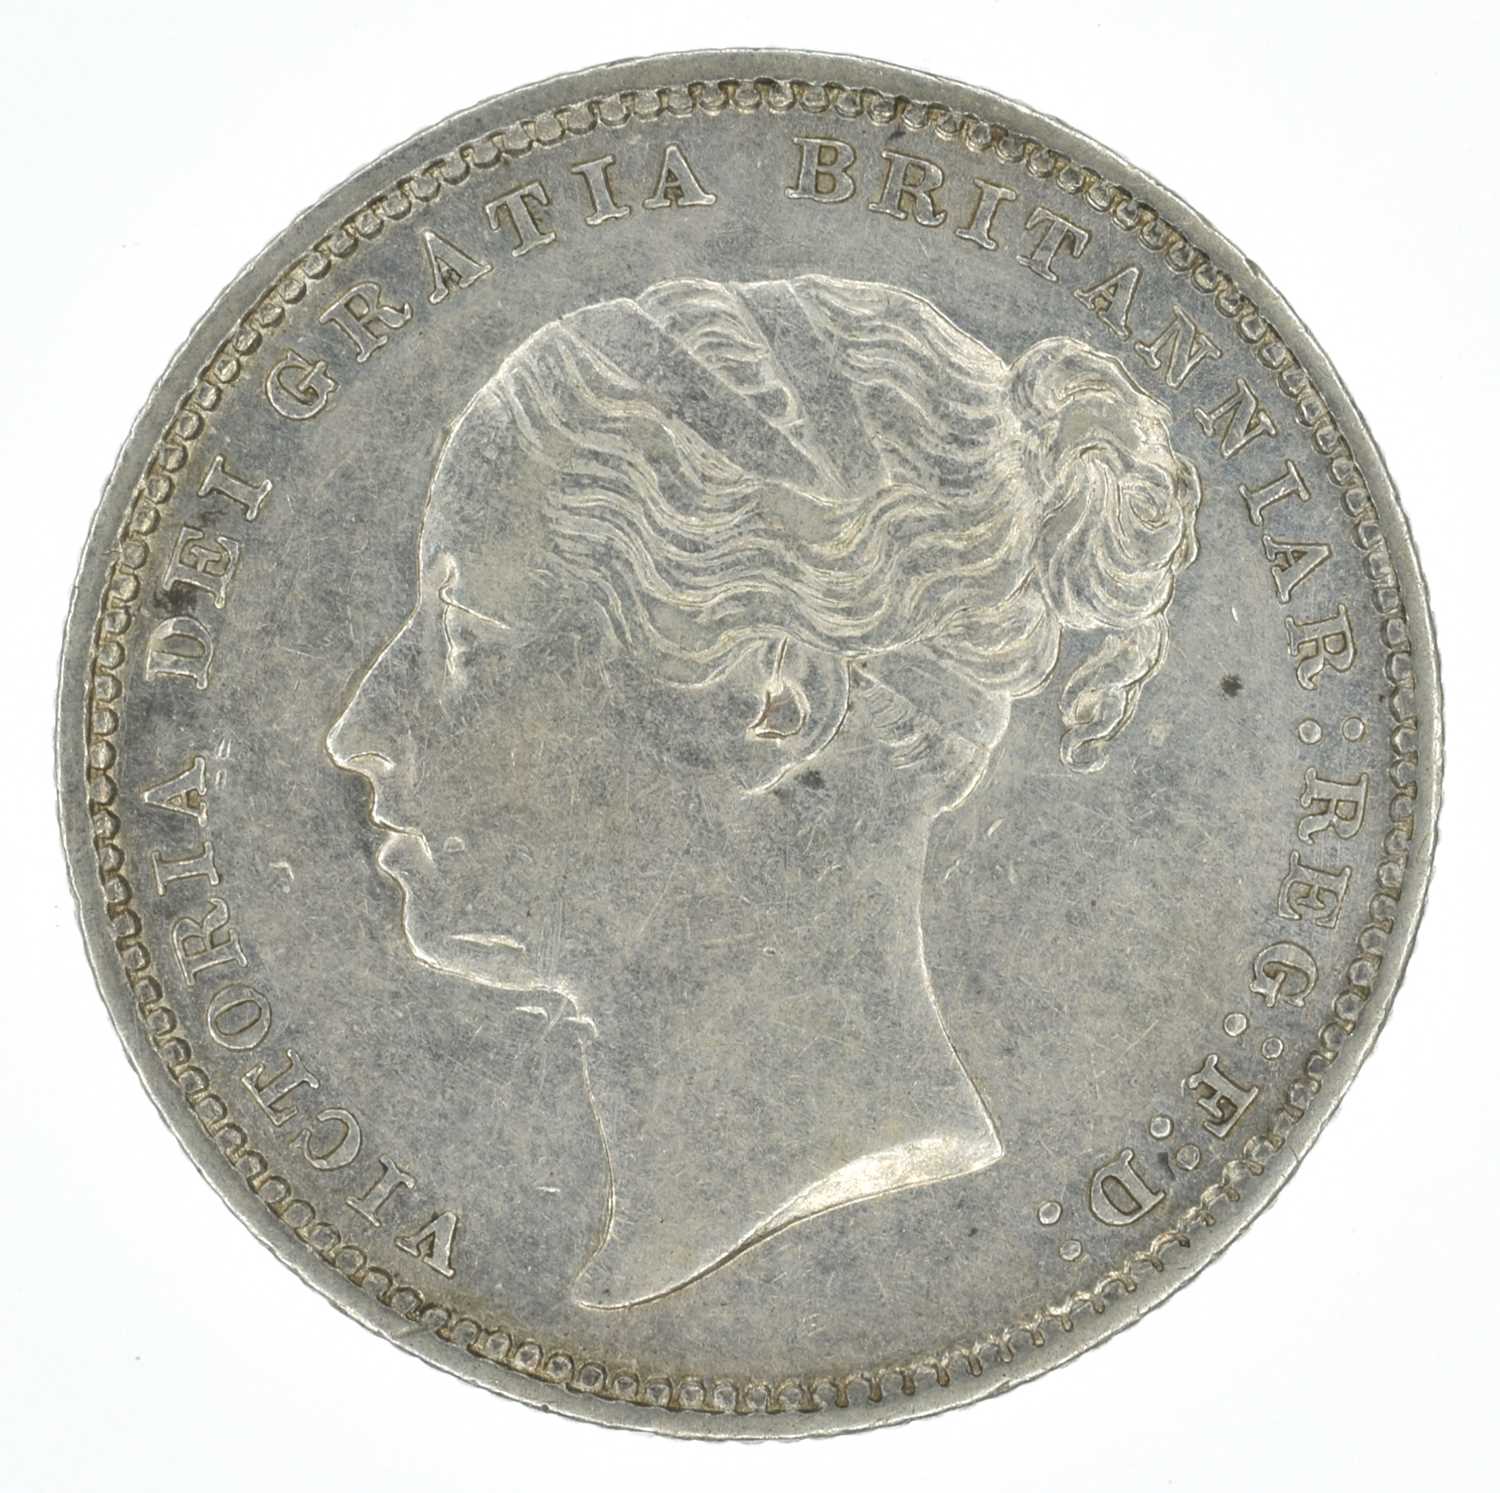 Lot 56 - Queen Victoria, Shillings, 1885 and 1875 (2).